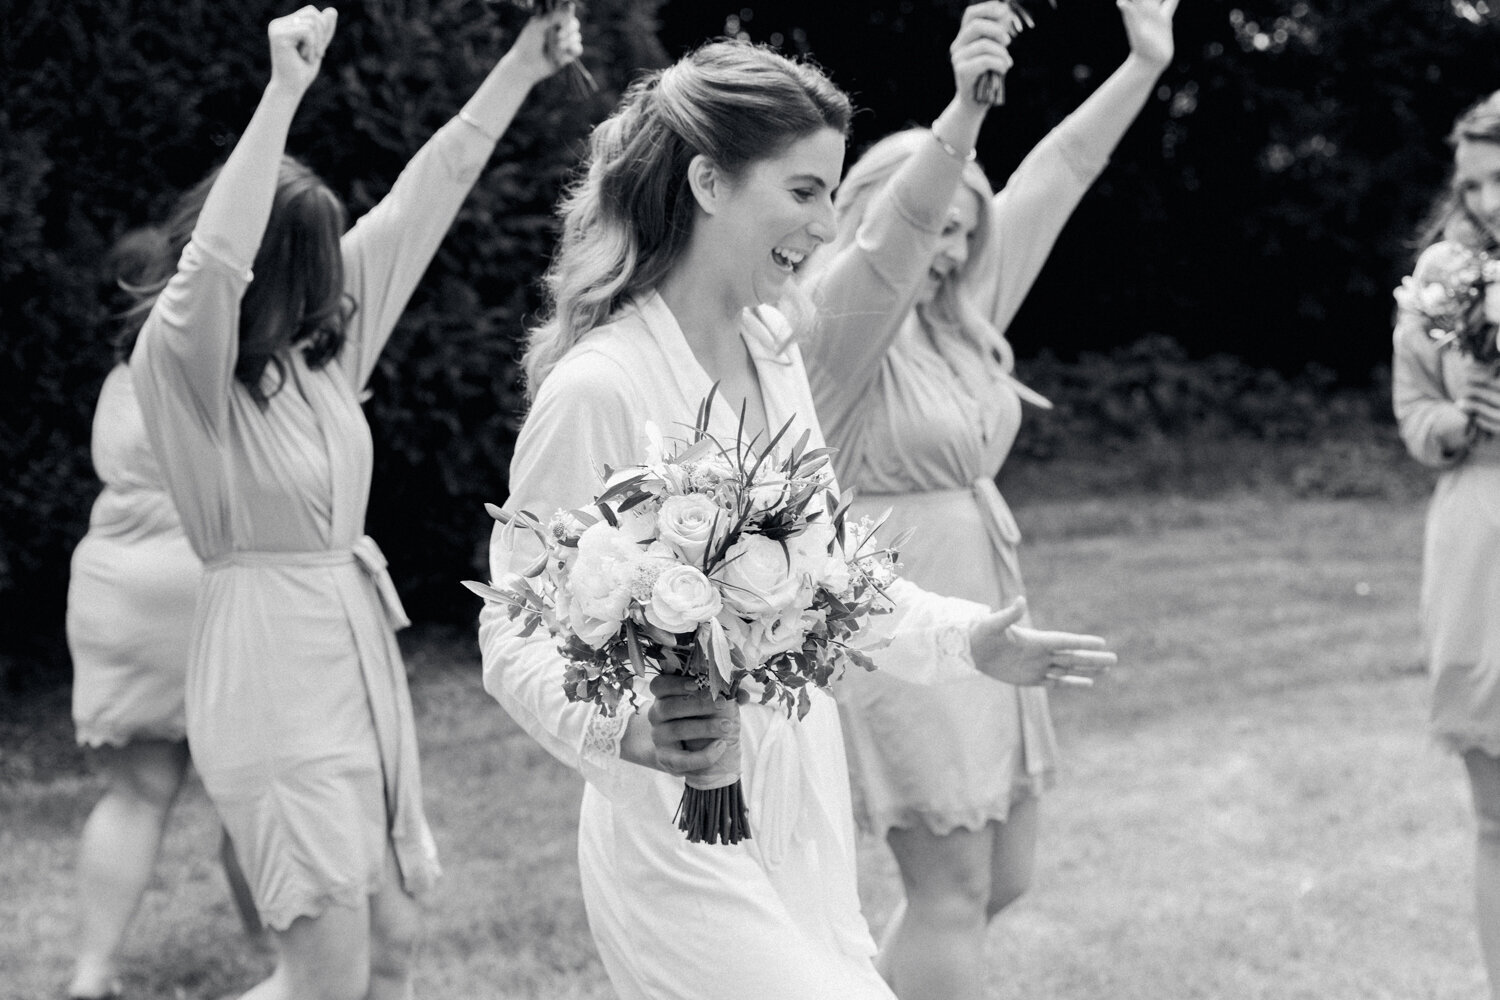 relaxed and natural photo of  the bride and her bridesmaids